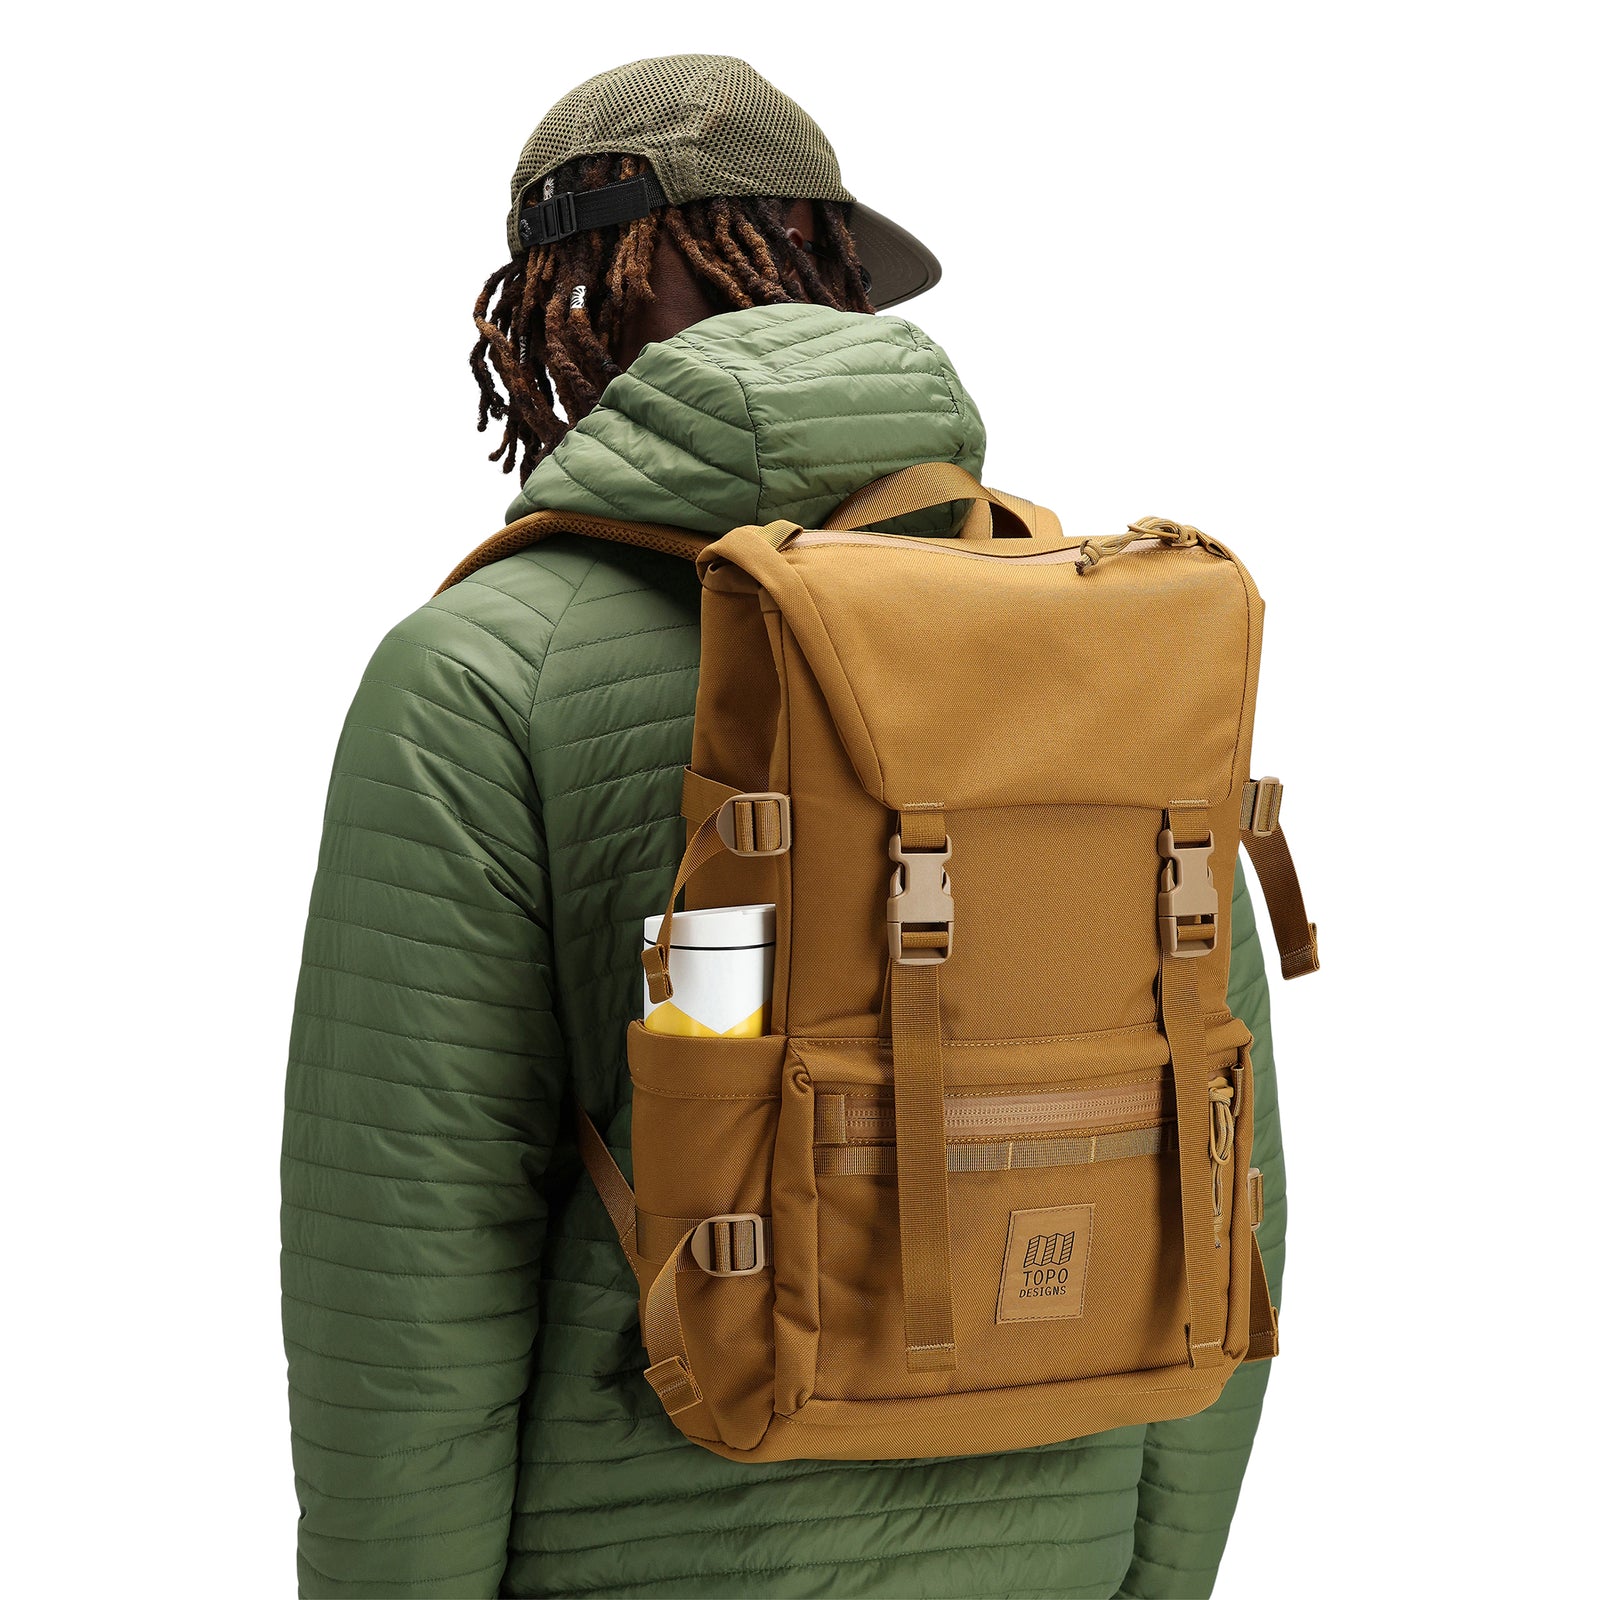 General back model shot of the Topo Designs Rover Pack Tech external access laptop backpack in "Dark Khaki".